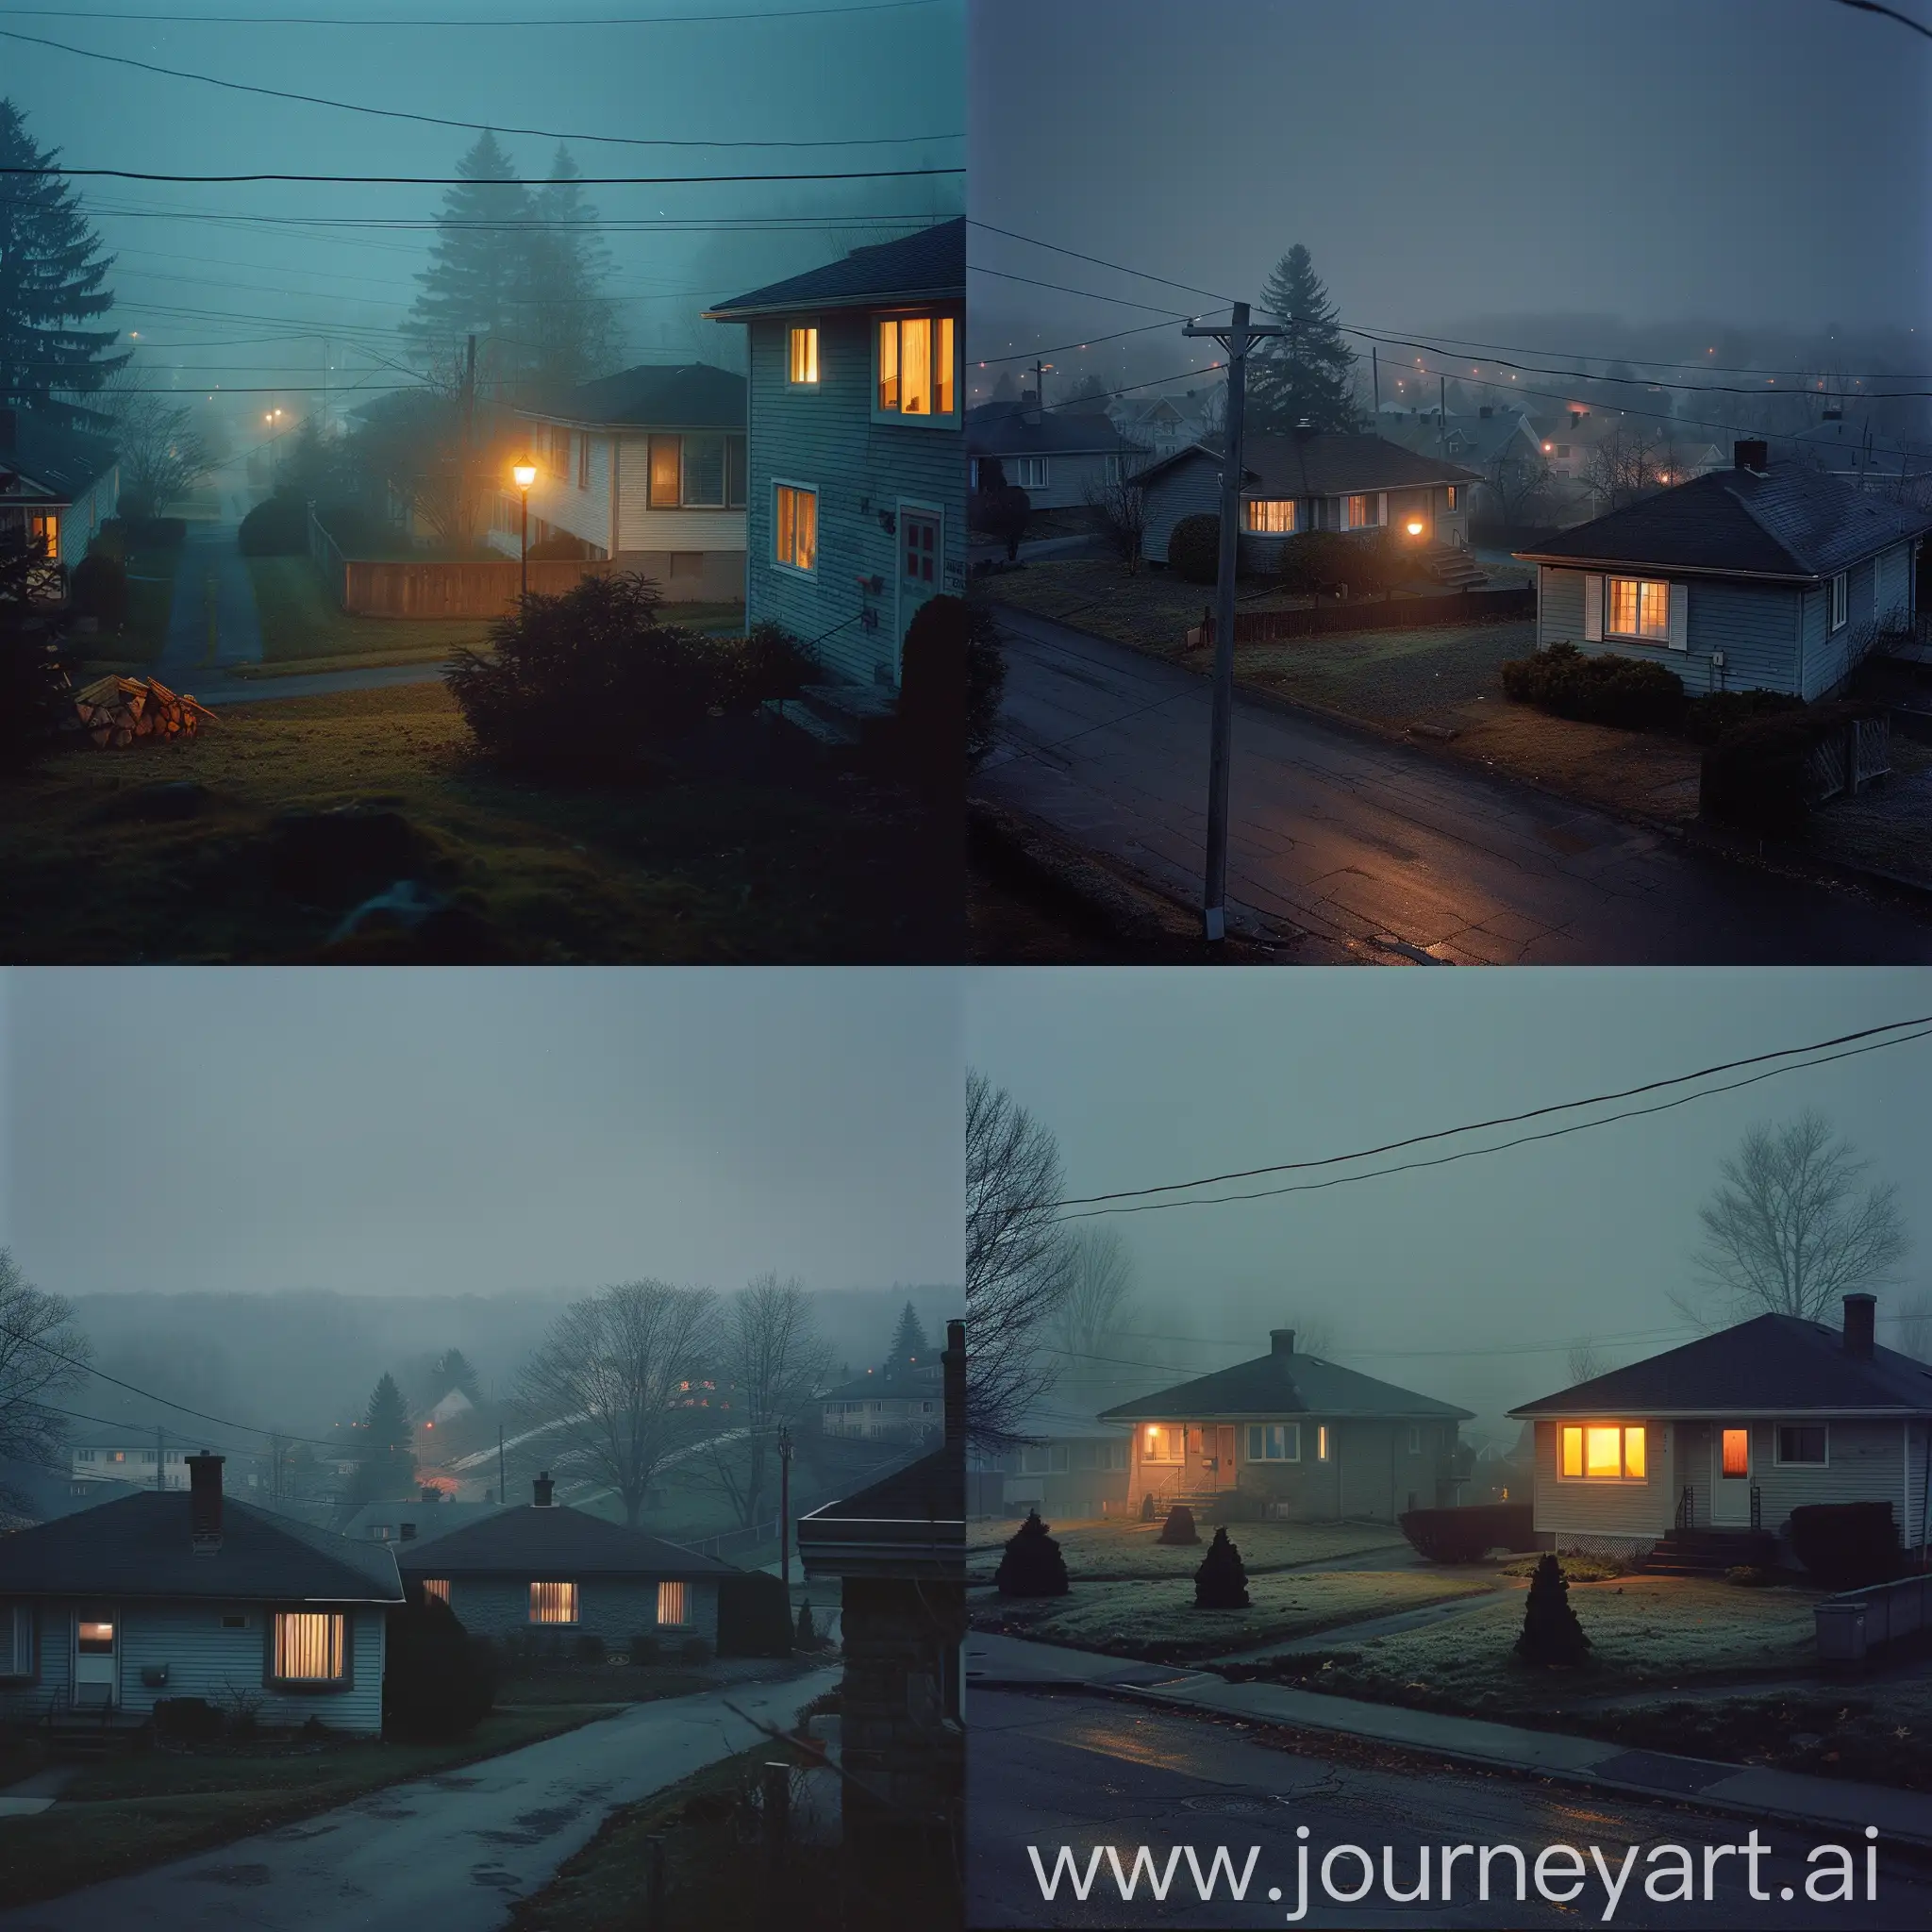 Moody-Night-Scene-Residential-Neighborhood-with-Quebec-1950s-Bungalows